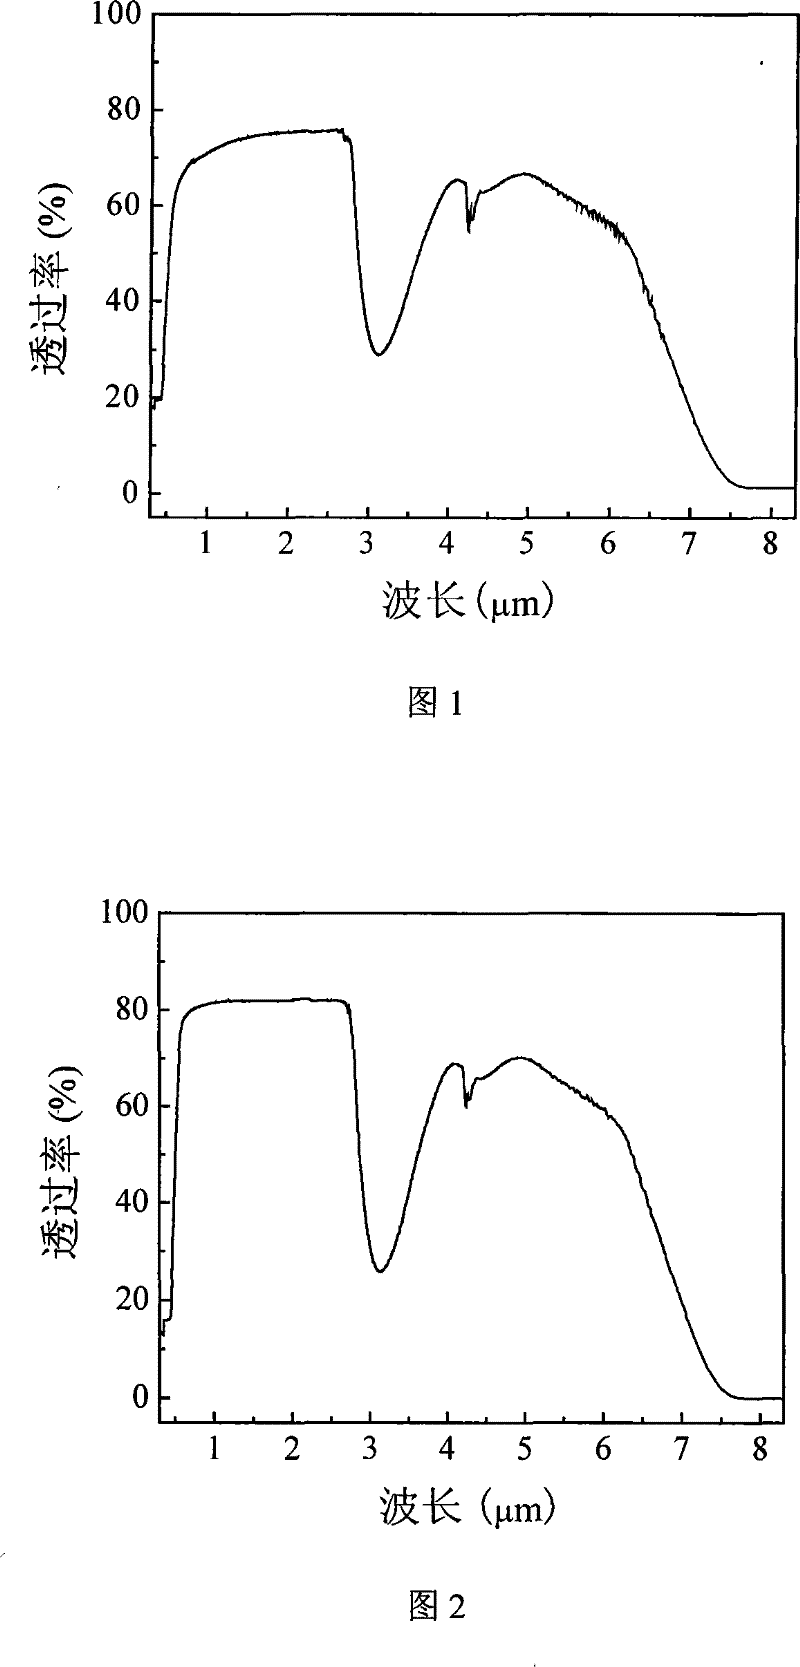 Alkali metal lanthanum bismuthate gallate infrared optical glass and method for making same